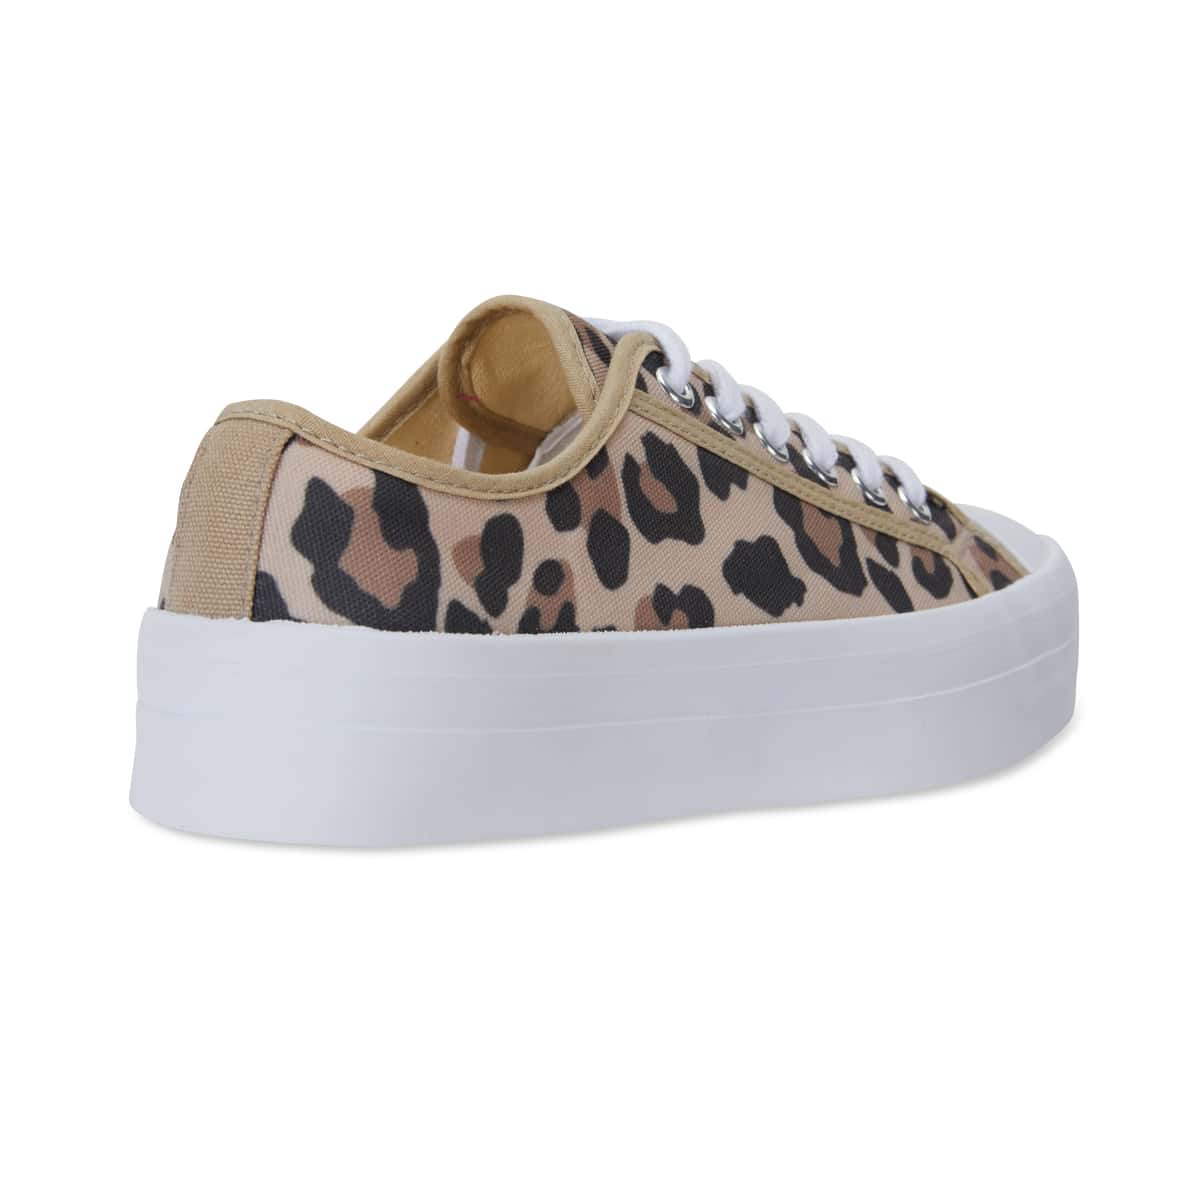 Stacey Sneaker in Animal Canvas